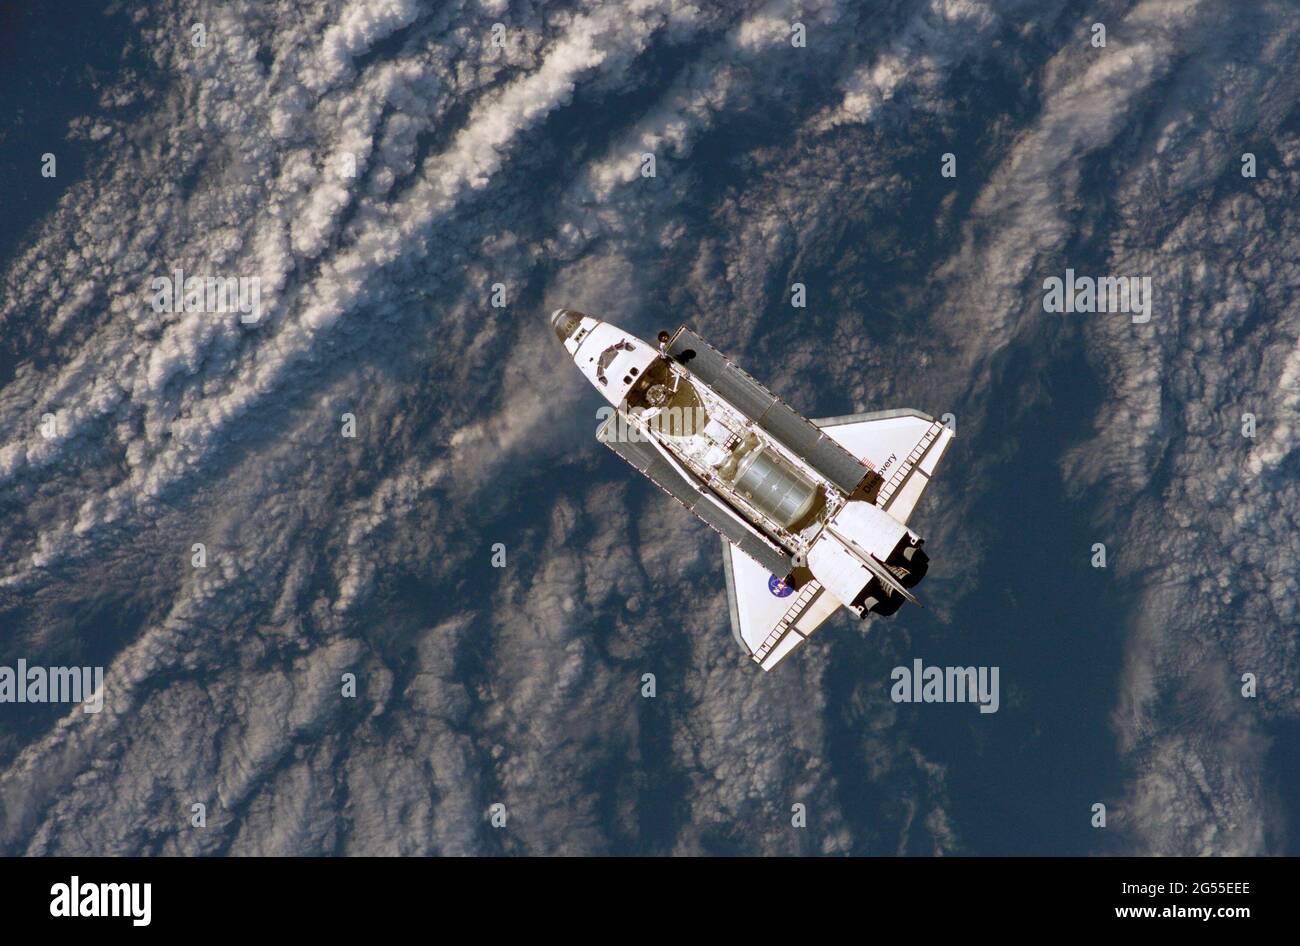 ONBOARD SPACE SHUTTLE DISCOVERY - 08 July 2006 - The Space Shuttle Discovery flies a short distance from the International Space Station for docking b Stock Photo